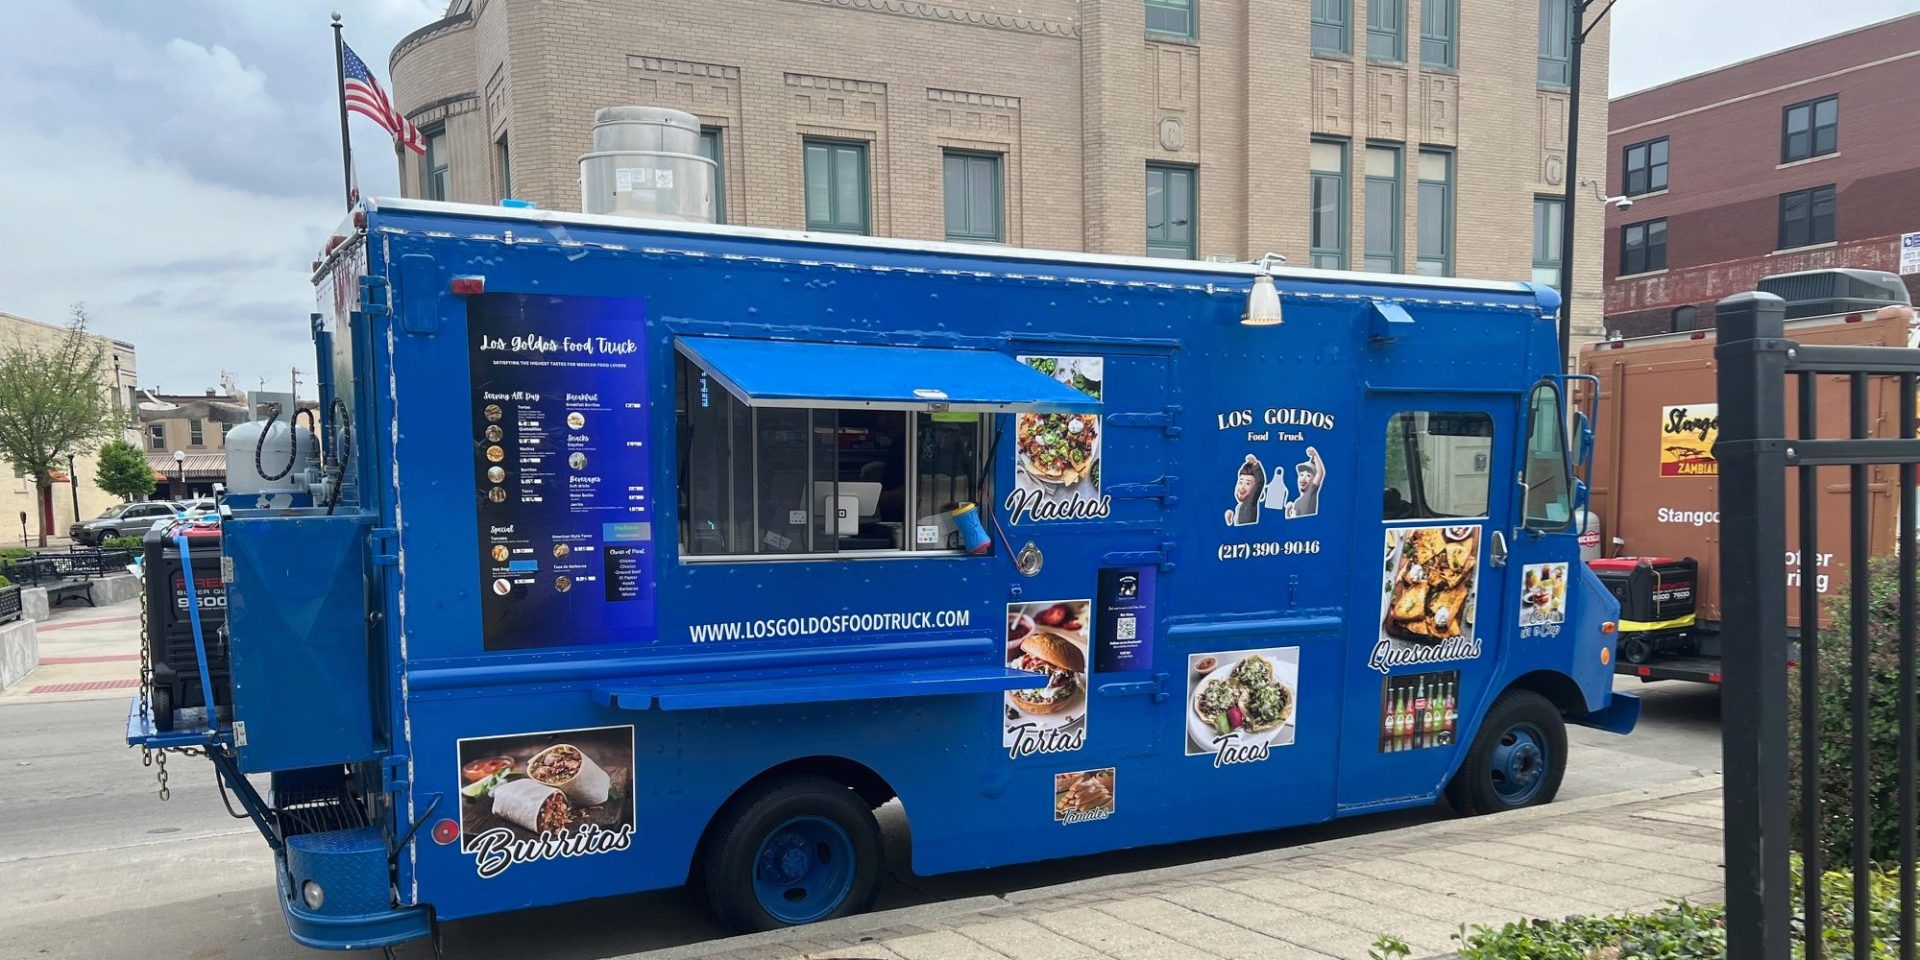 A blue food truck named Los Gordos is parked on the curb of Neil Street in Downtown Champaign on a cloudy spring day.